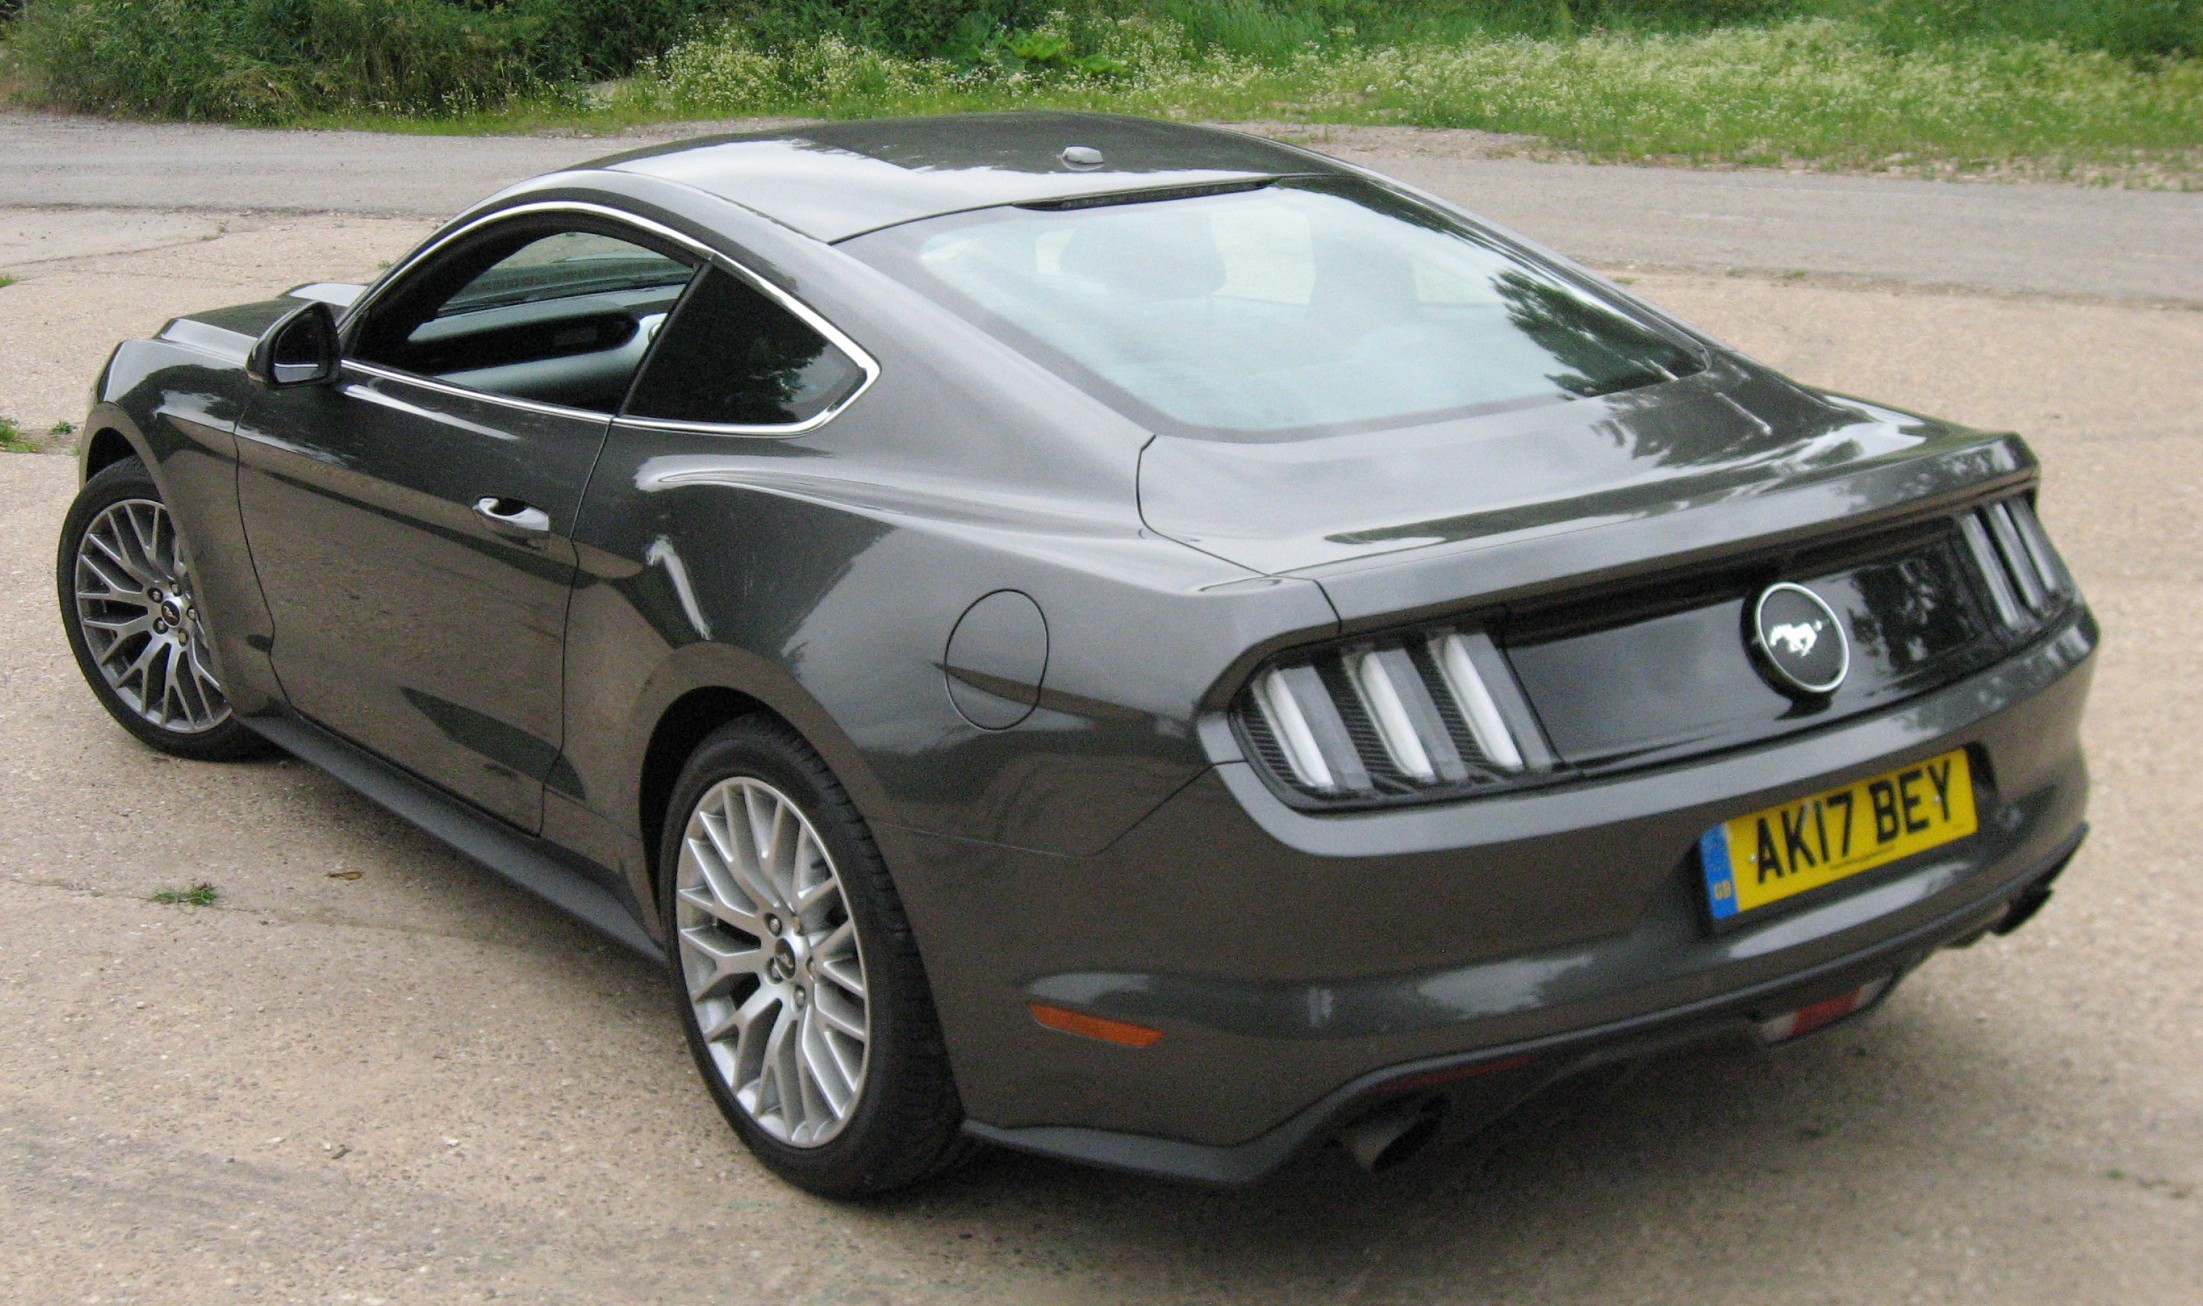 Ford Mustang 2.3 EcoBoost Auto road test report and review